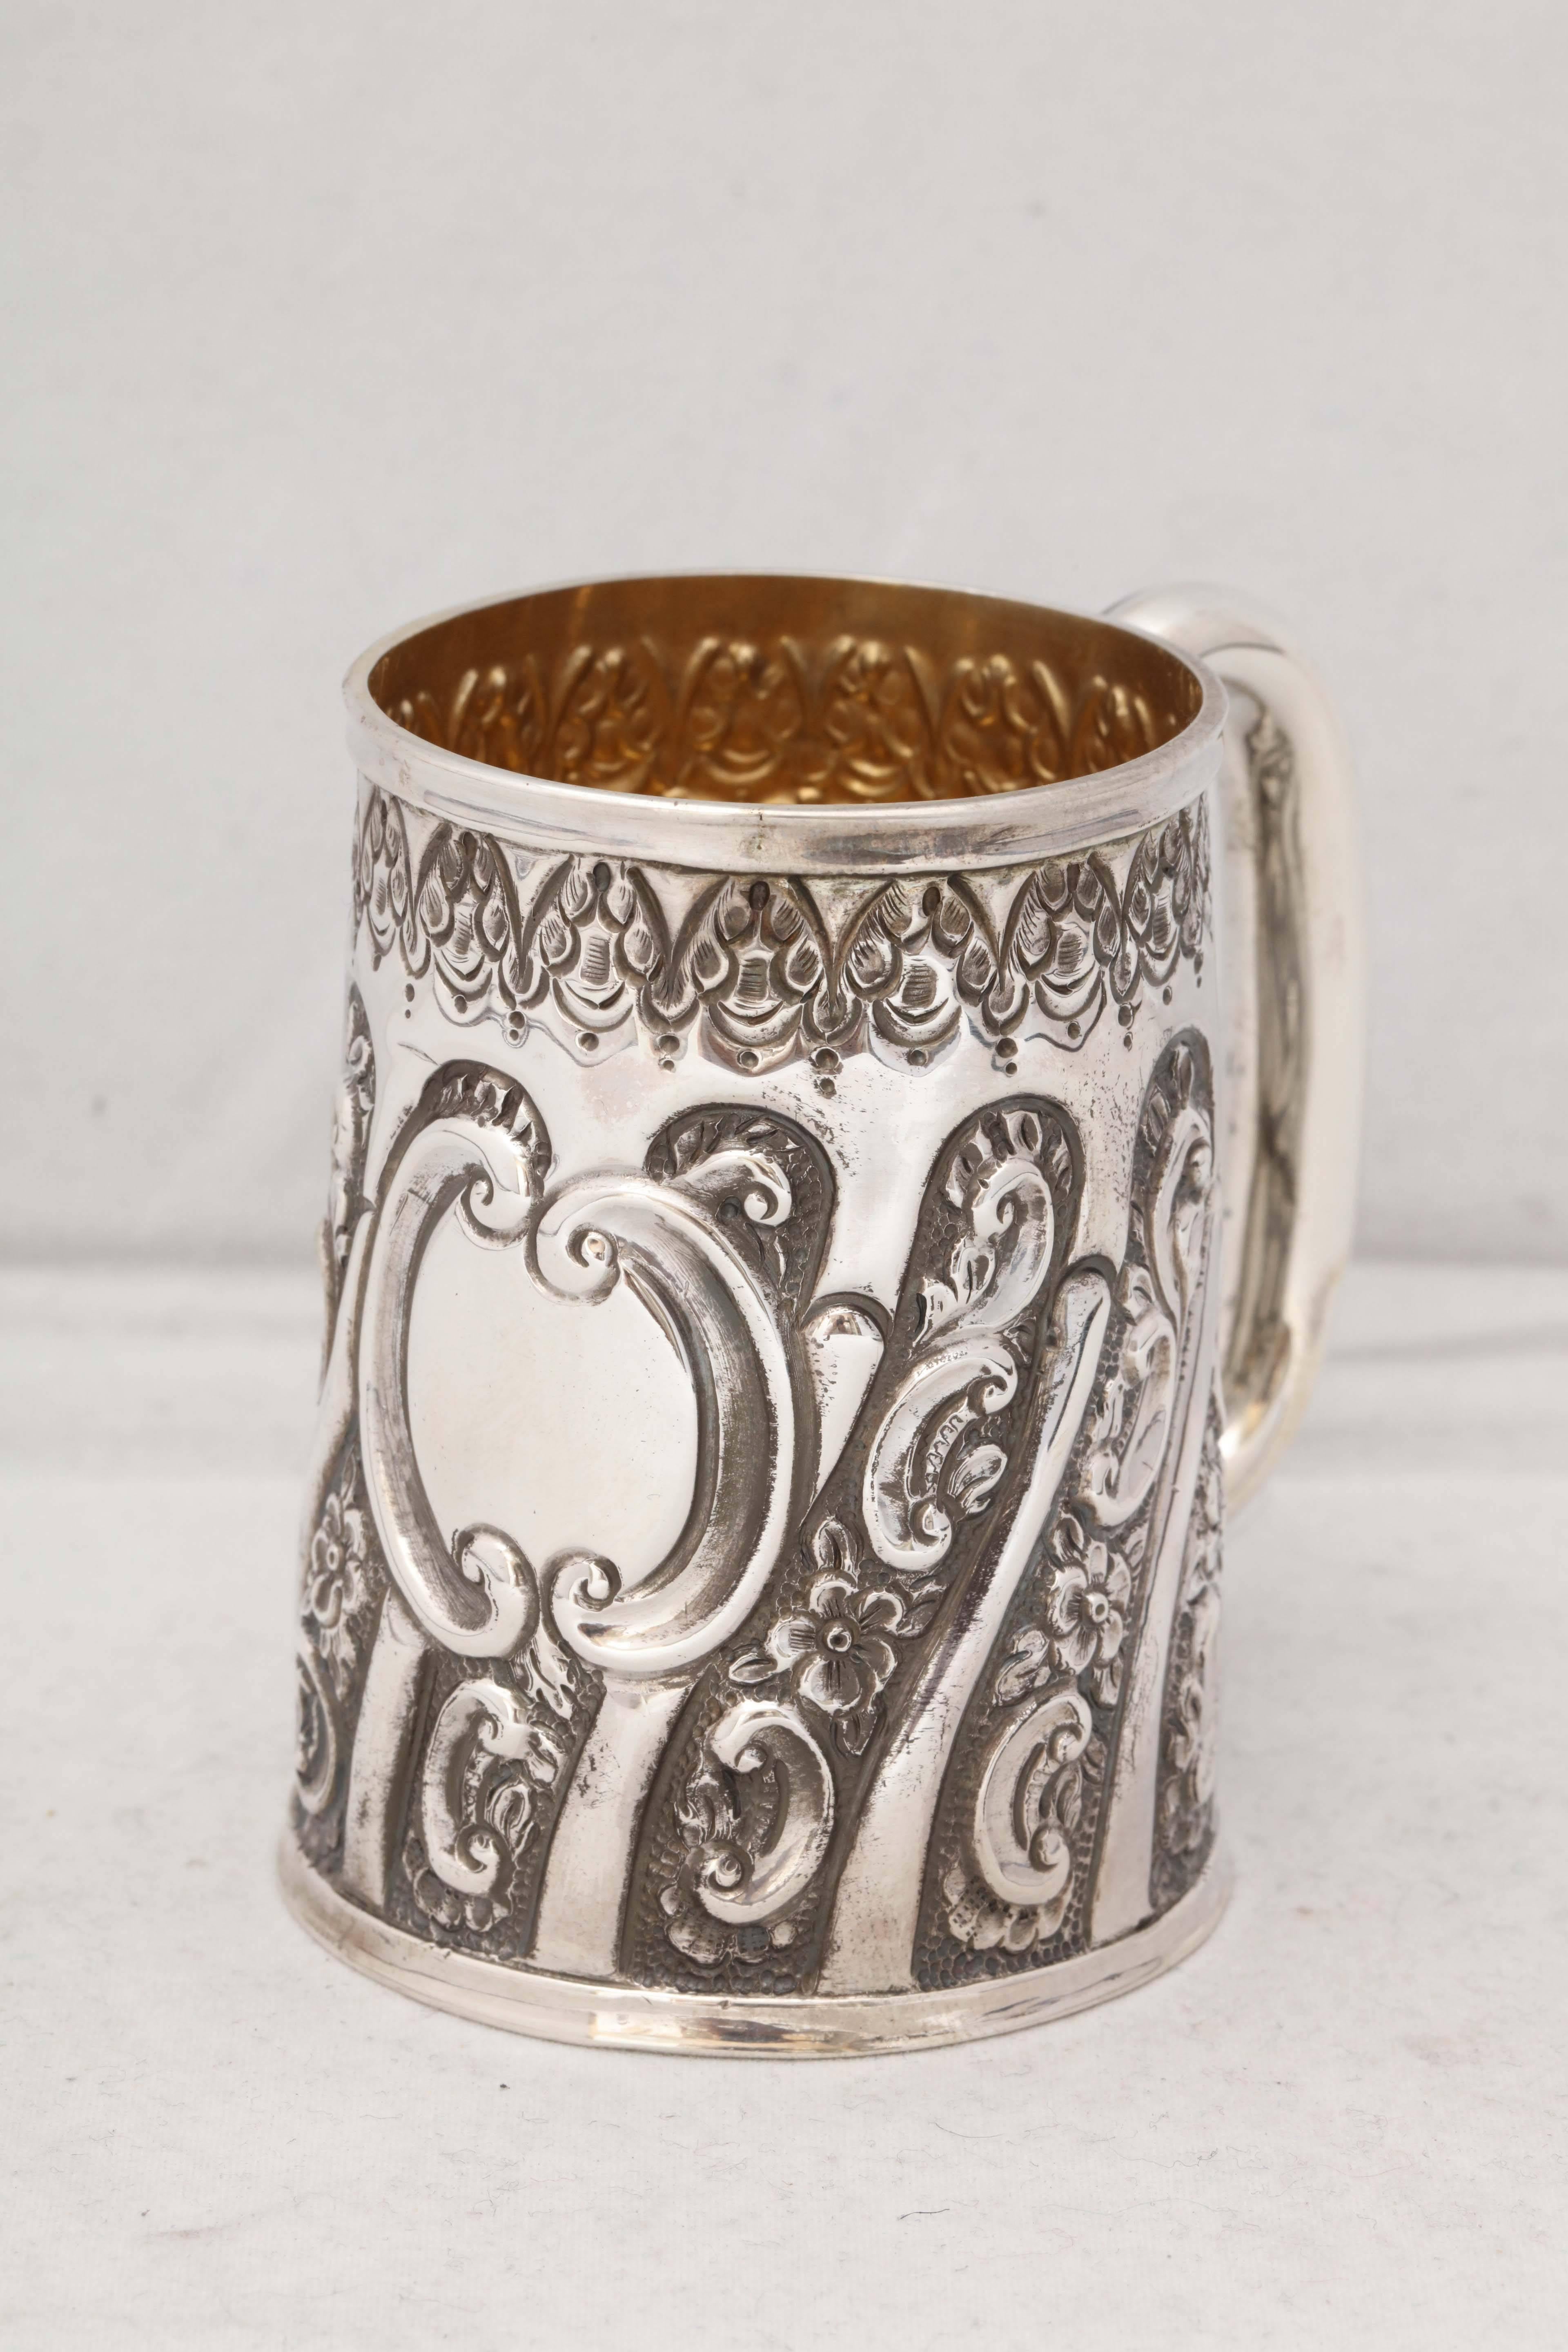 Victorian, sterling silver baby cup, Birmingham, England, 1892, Hayes Bros. (William and Harry Hayes) - makers. Lovely, swirled design. Gilded interior; vacant cartouche. @3